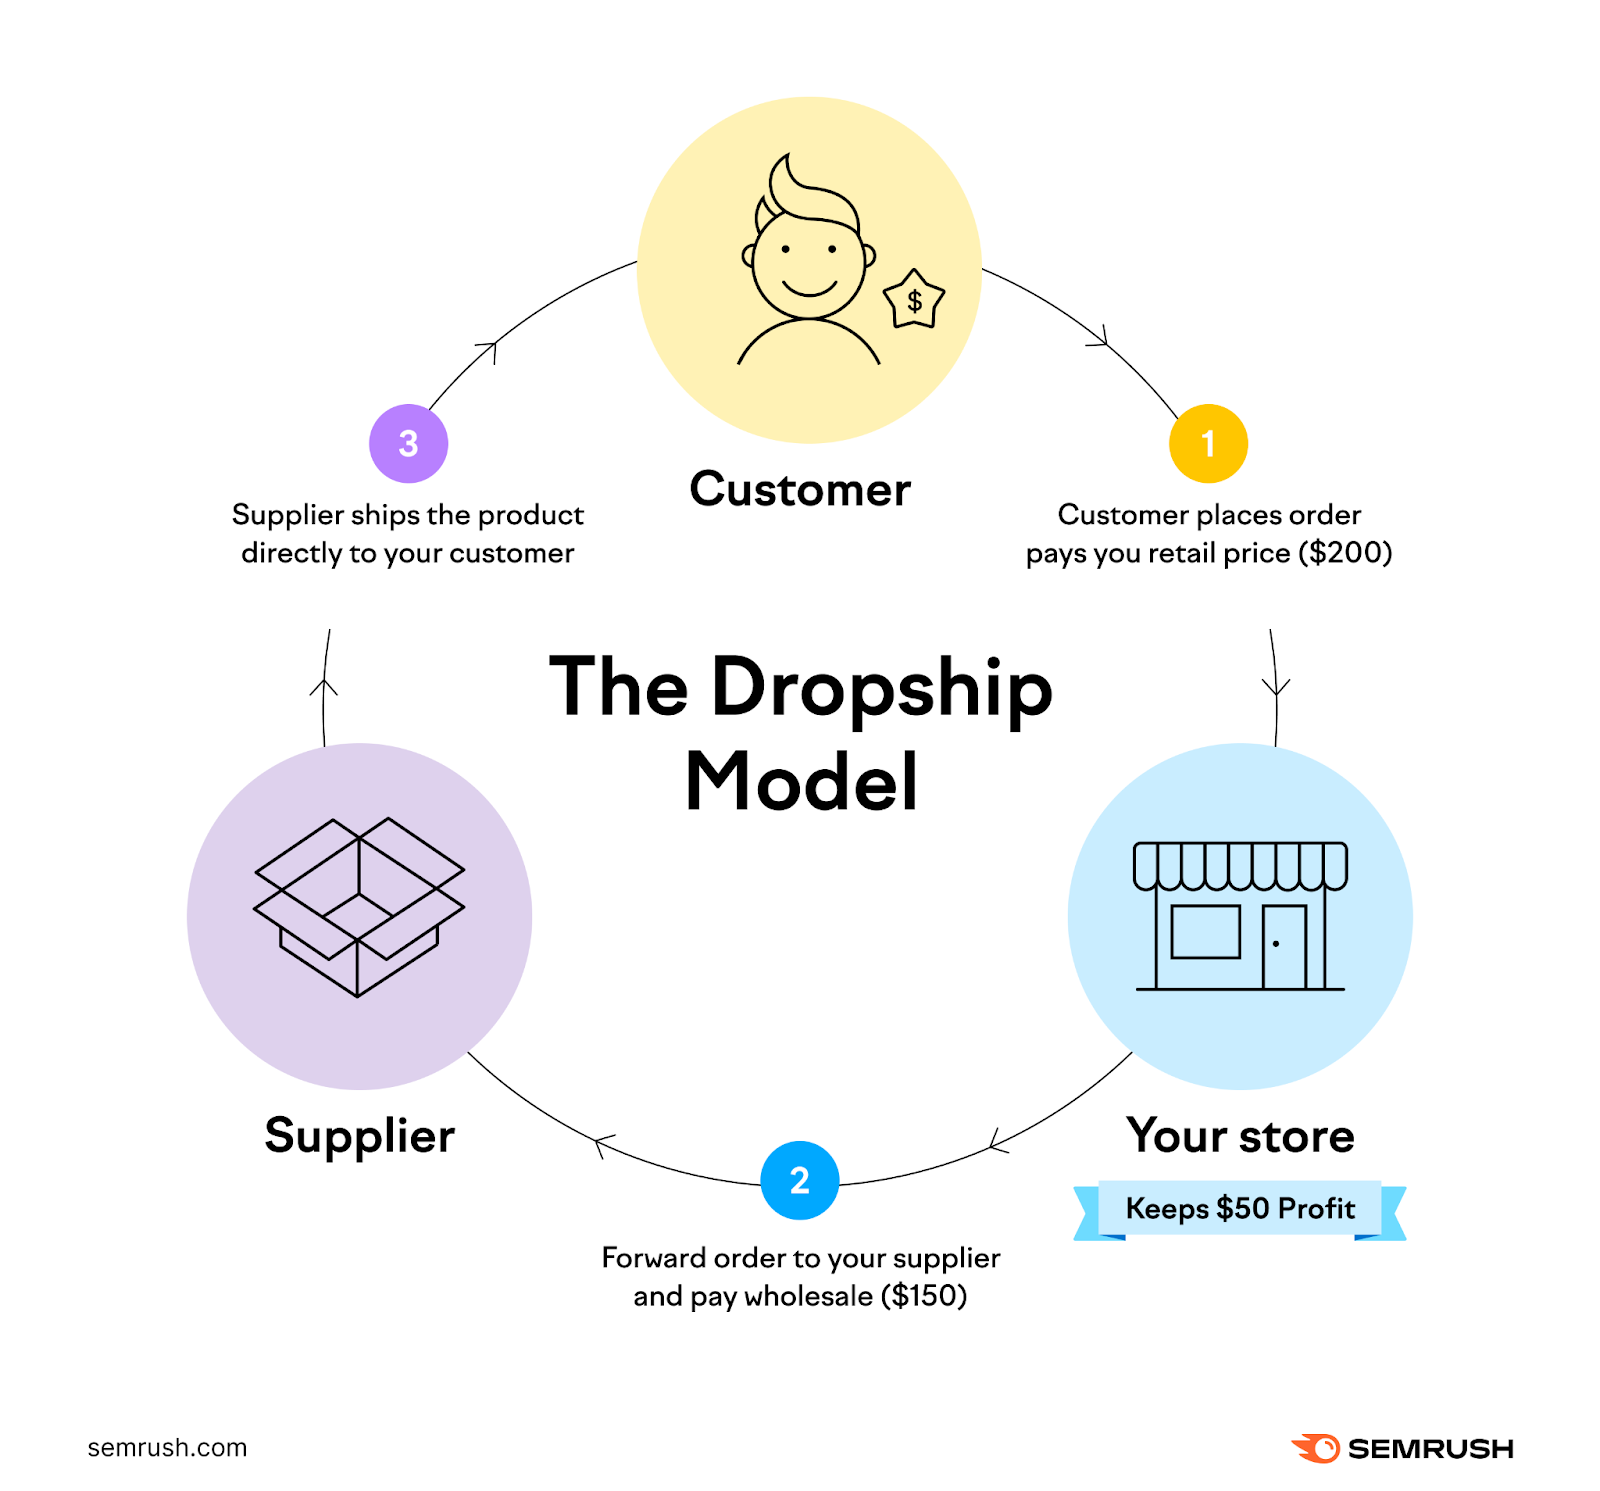 An infographic showing how dropship model works